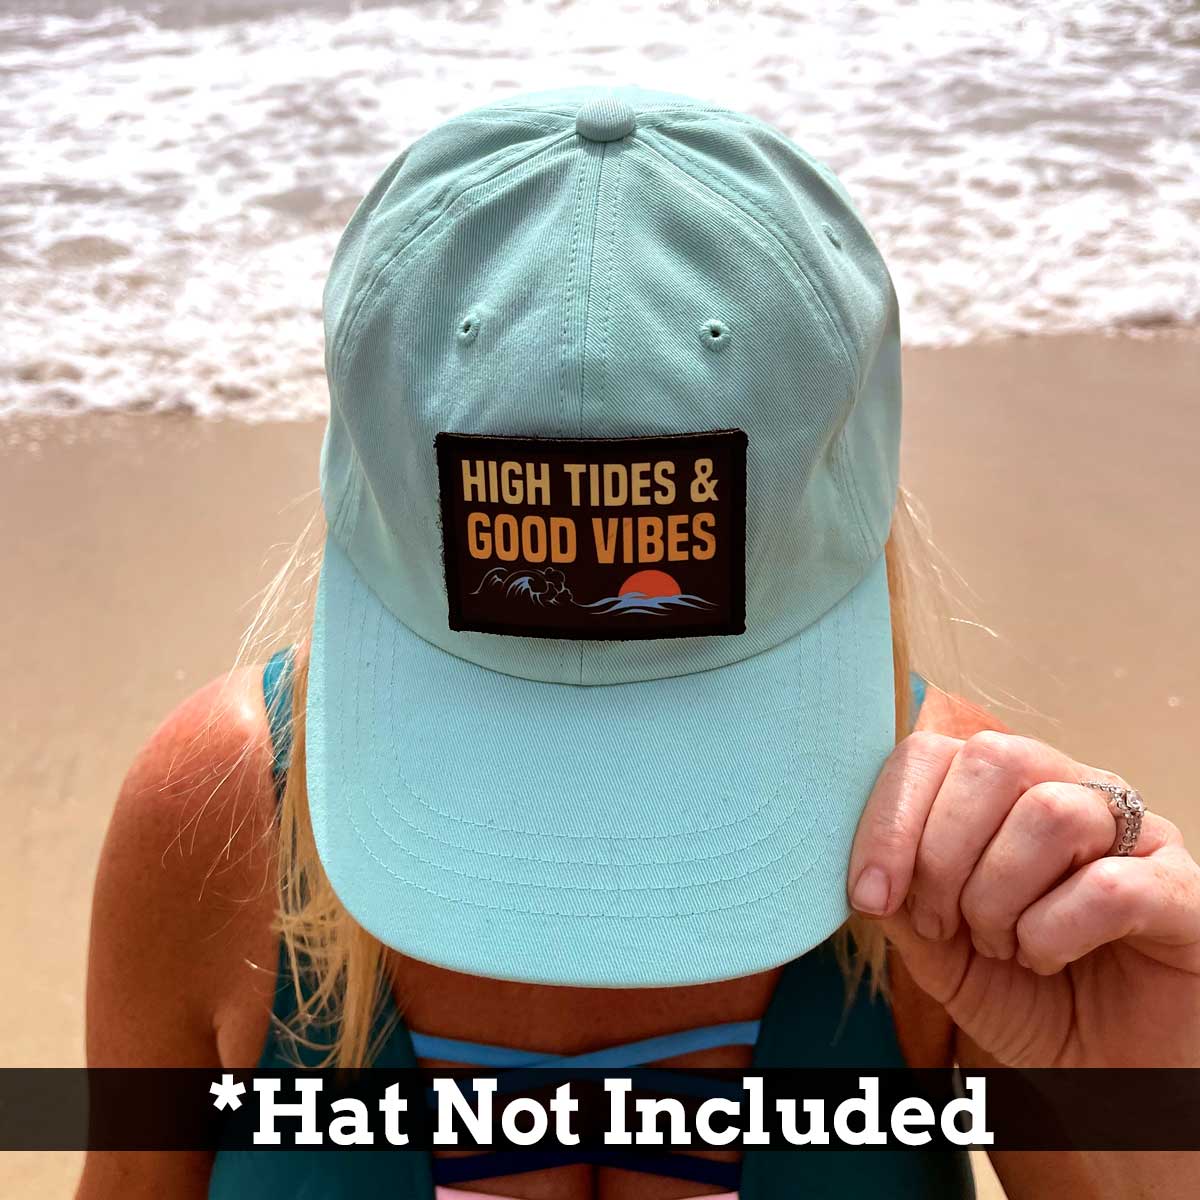 High Tides & Good Vibes - Removable Patch - Pull Patch - Removable Patches For Authentic Flexfit and Snapback Hats